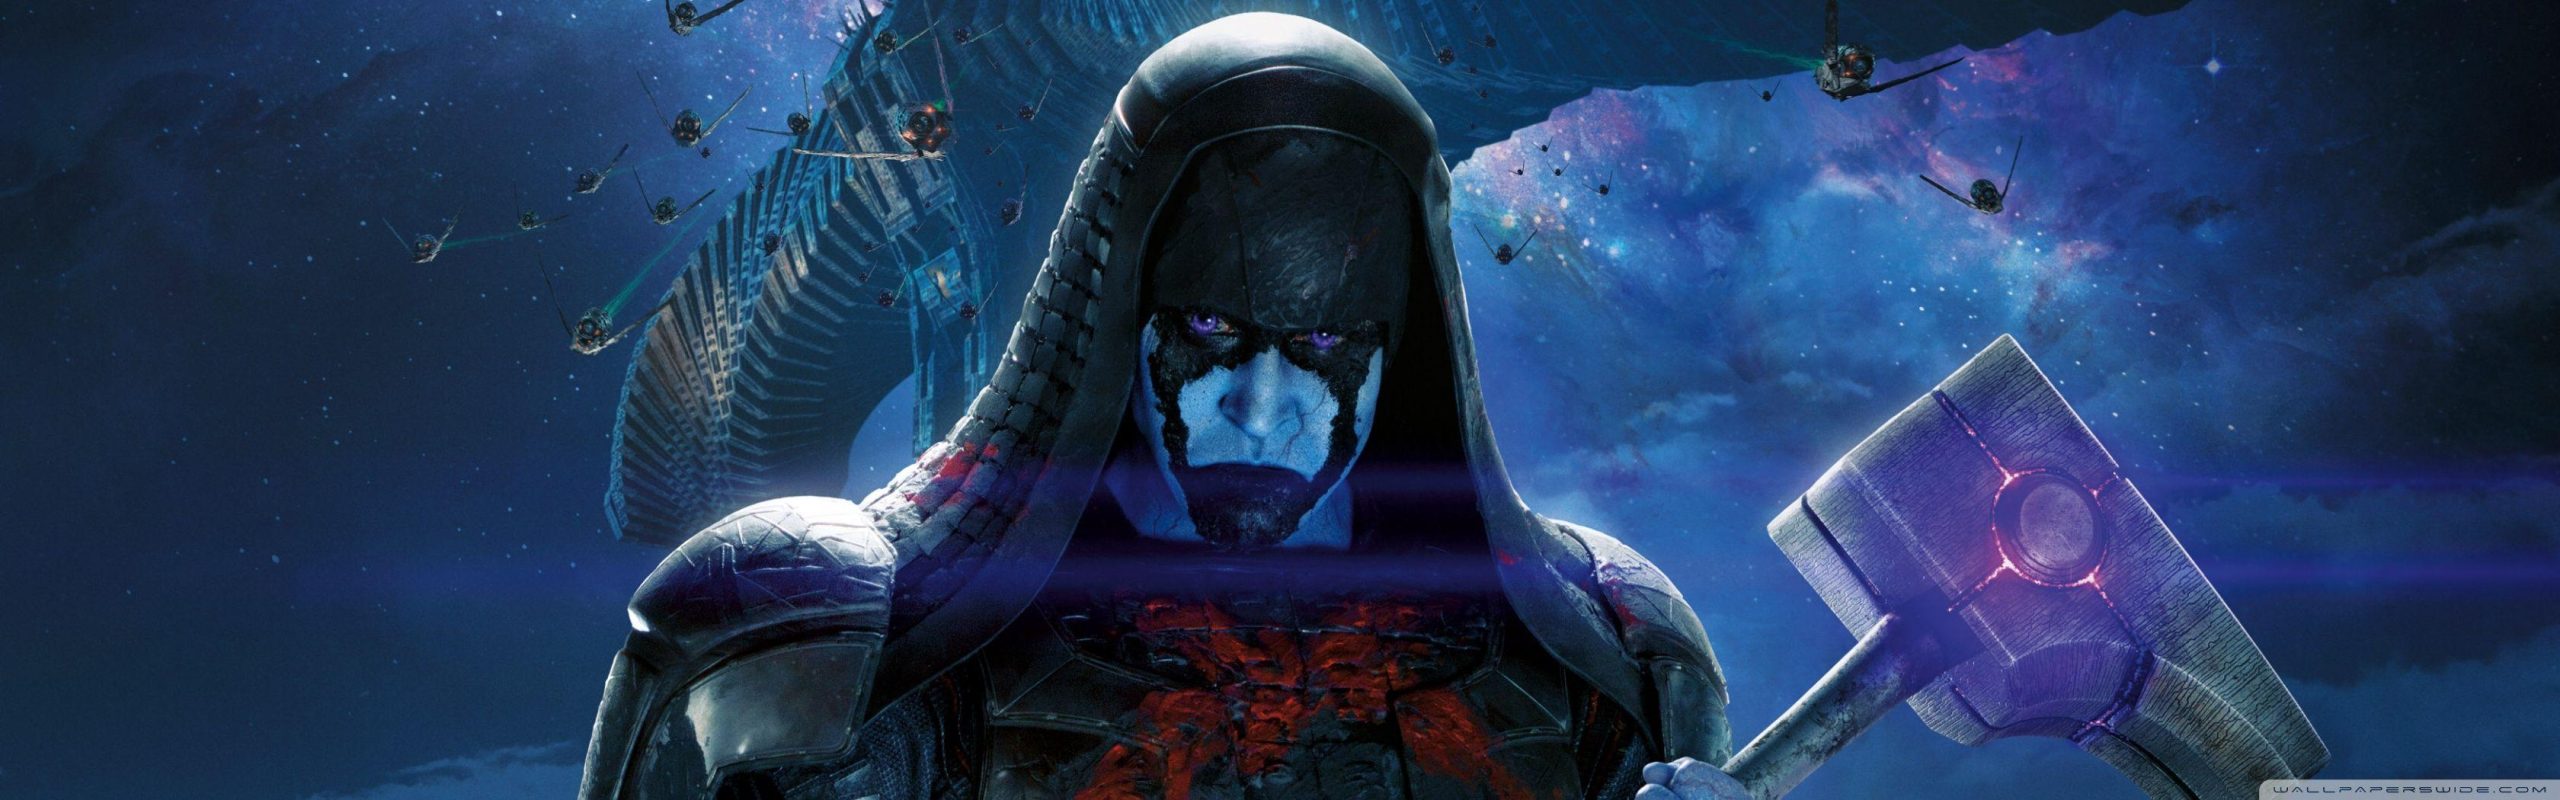 Ronan The Accuser Guardians Of The Galaxy Wallpaper Phone, Ronan The Accuser Guardians Of The Galaxy, Movies